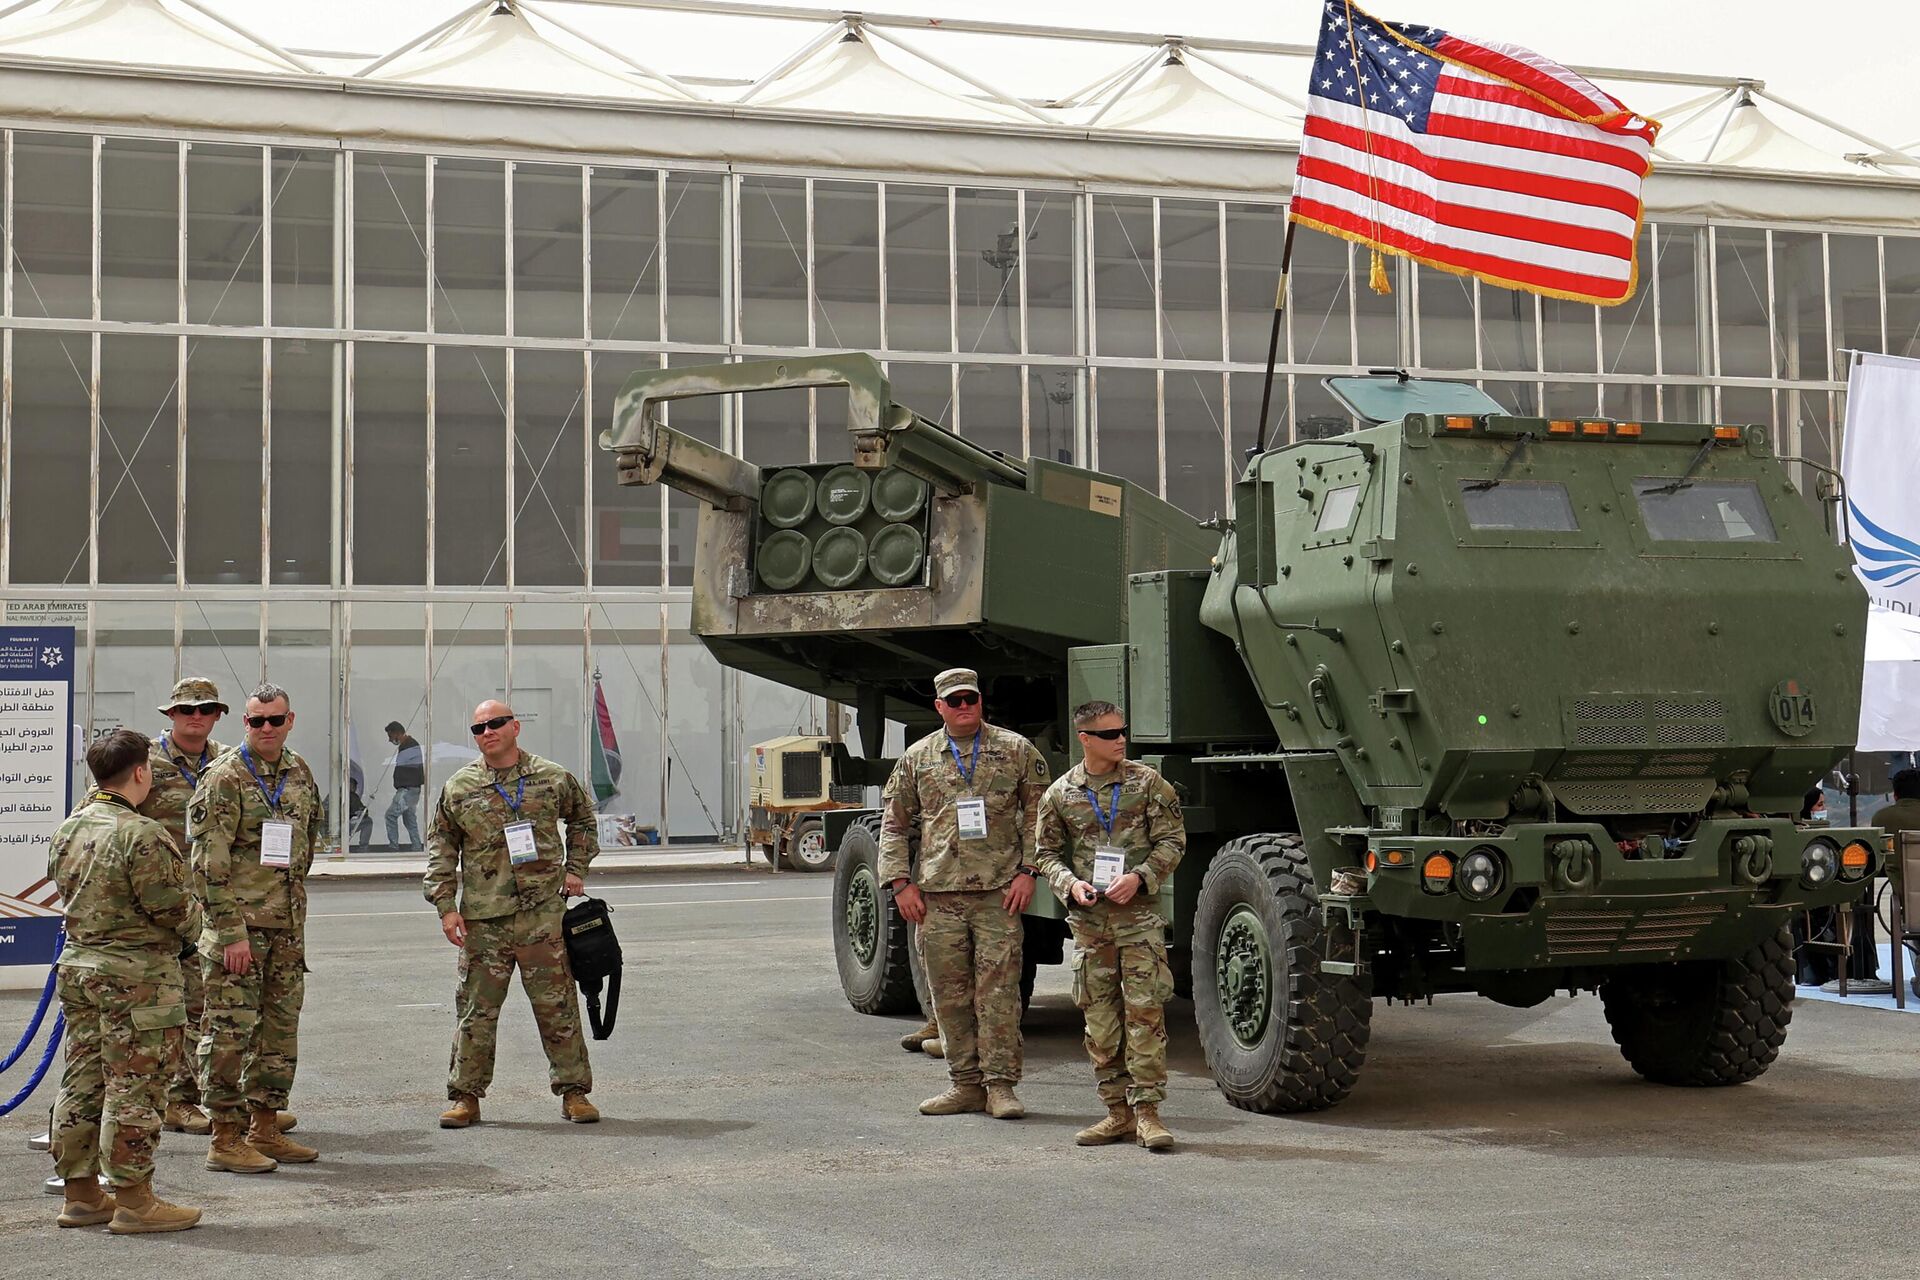 (FILES) In this file photo taken on March 06, 2022 US military personnel stand by a M142 High Mobility Artillery Rocket System (HIMARS) during Saudi Arabia’s first World Defense Show, north of the capital Riyadh. - - Sputnik International, 1920, 01.06.2022